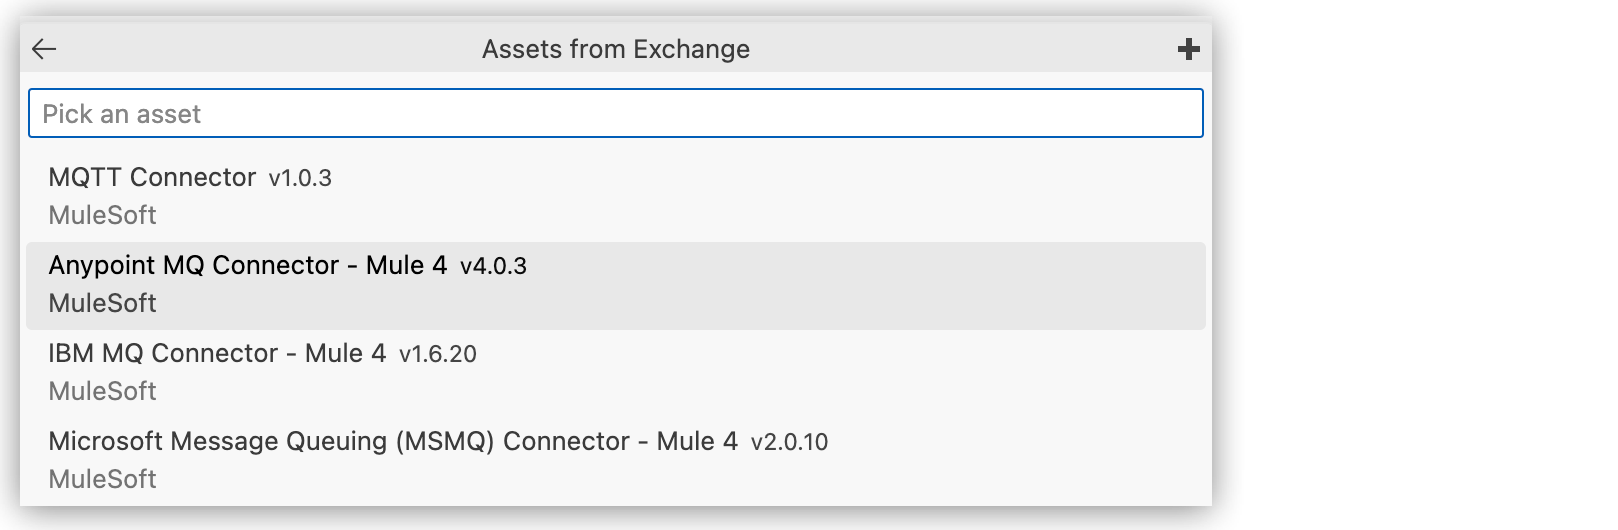 "Import Anypoint MQ Connector from Exchange